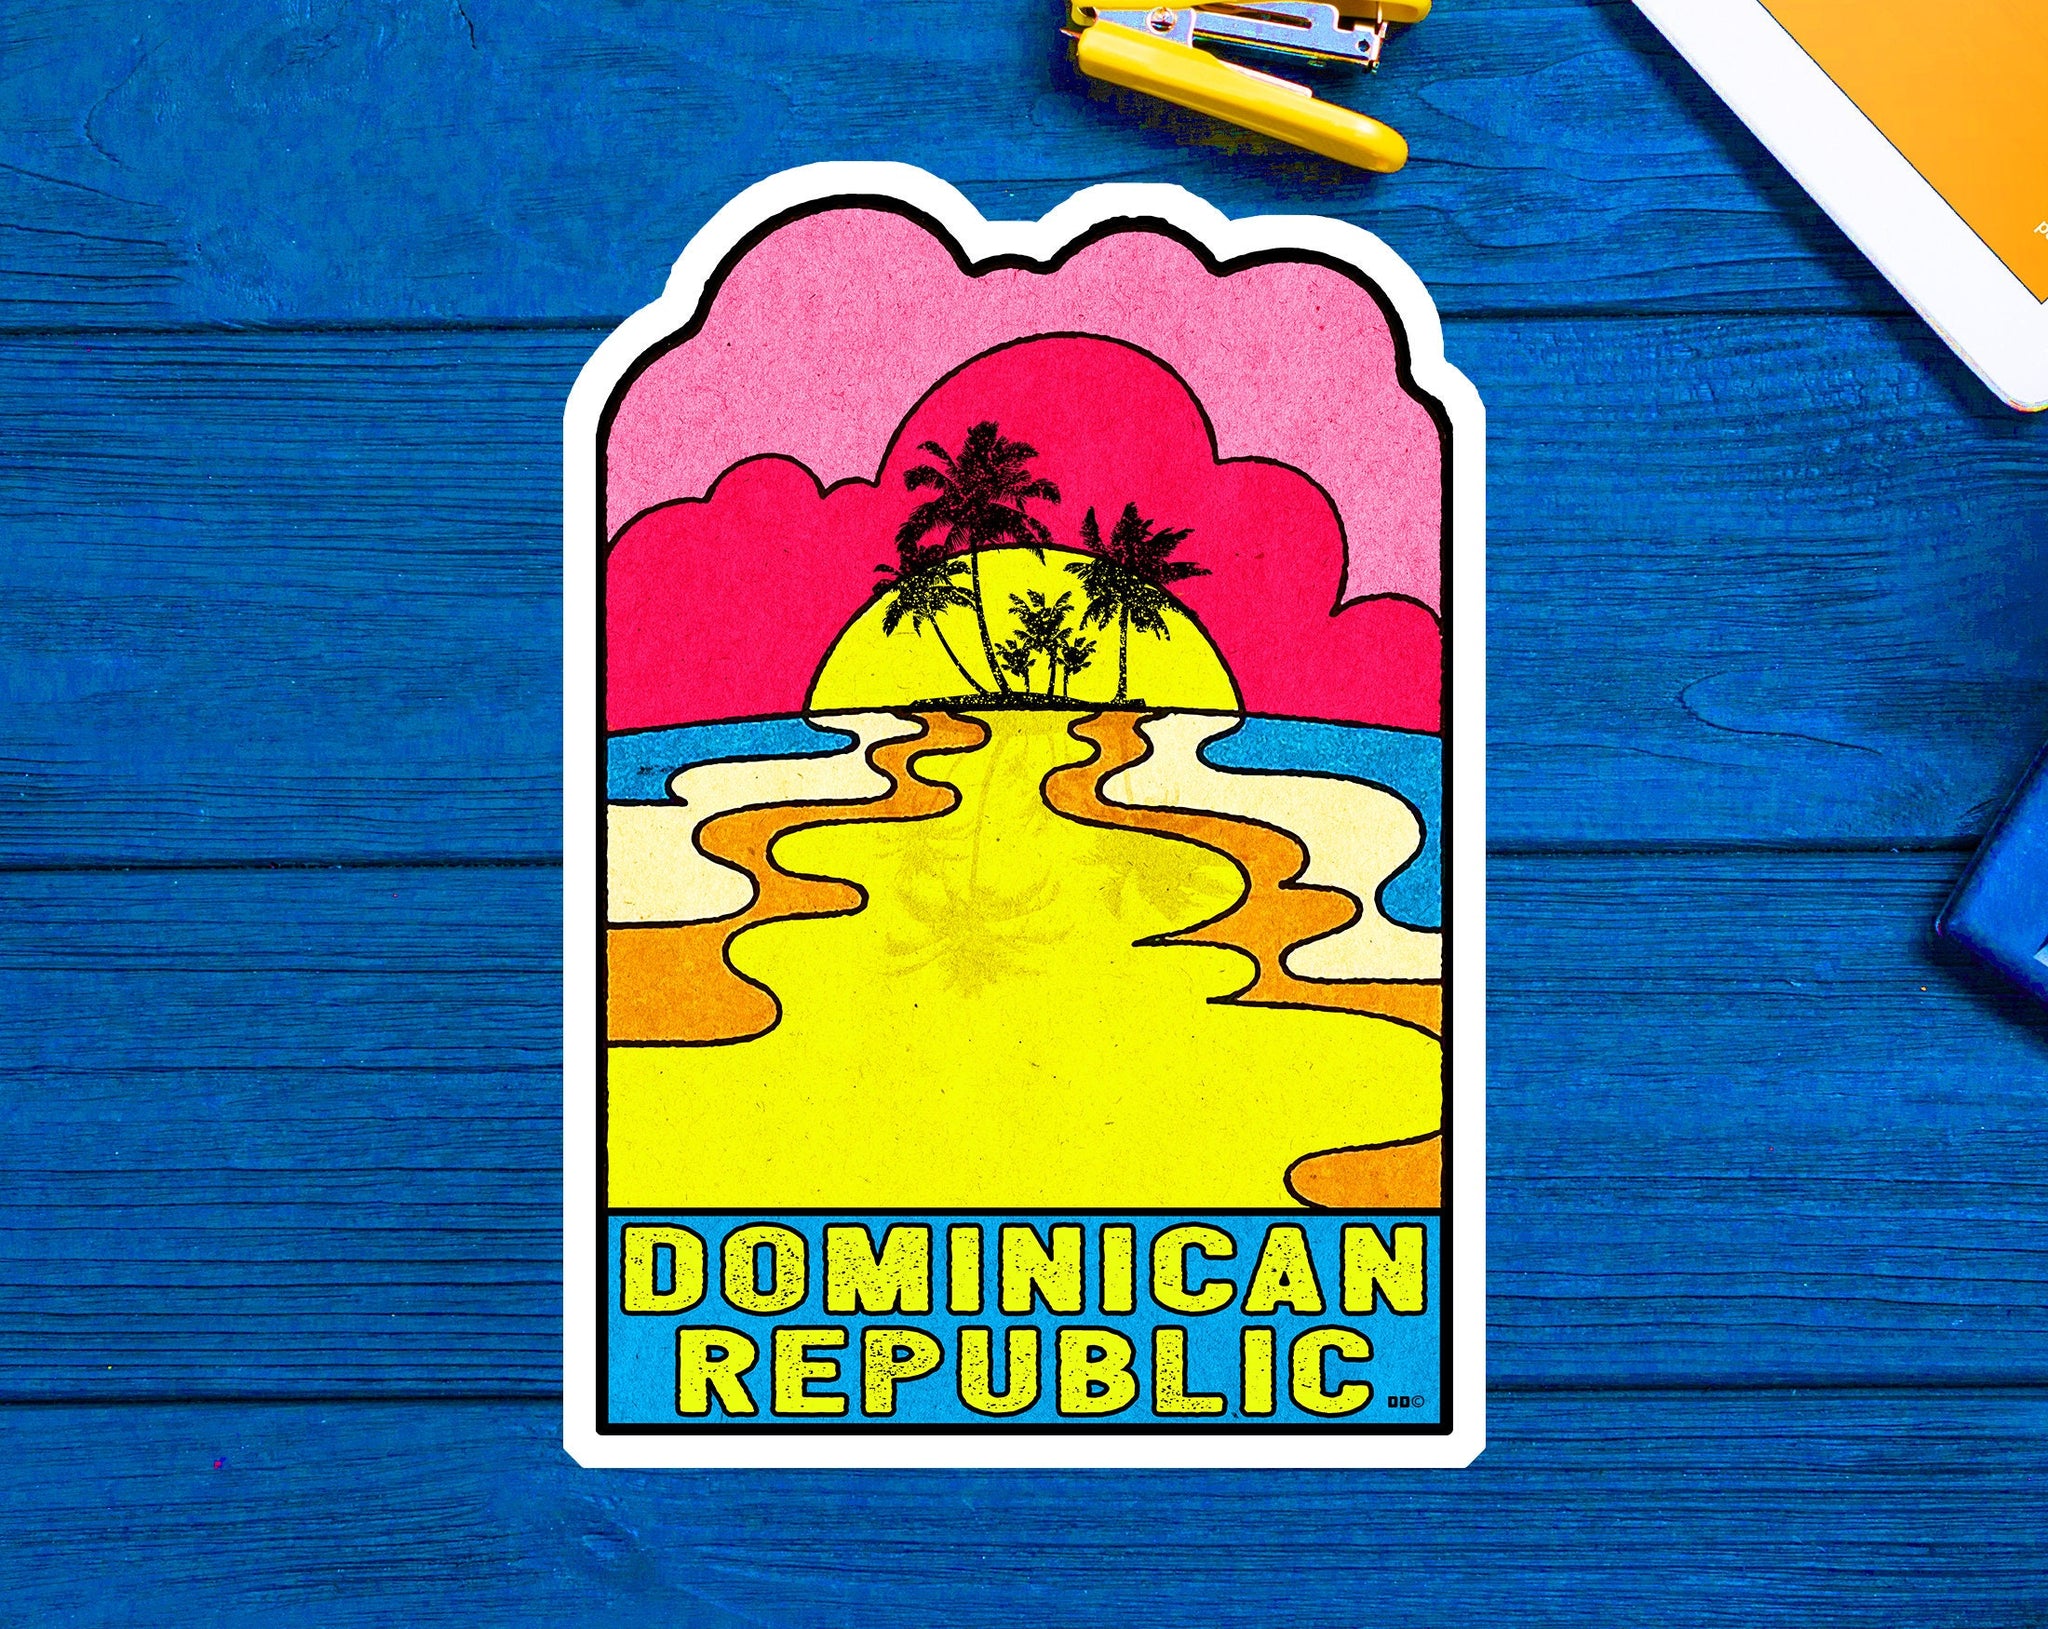 Dominican Republic Punta Cana Decal Sticker 3.75" x 2.7" Sunset Palm Trees Vintage Style